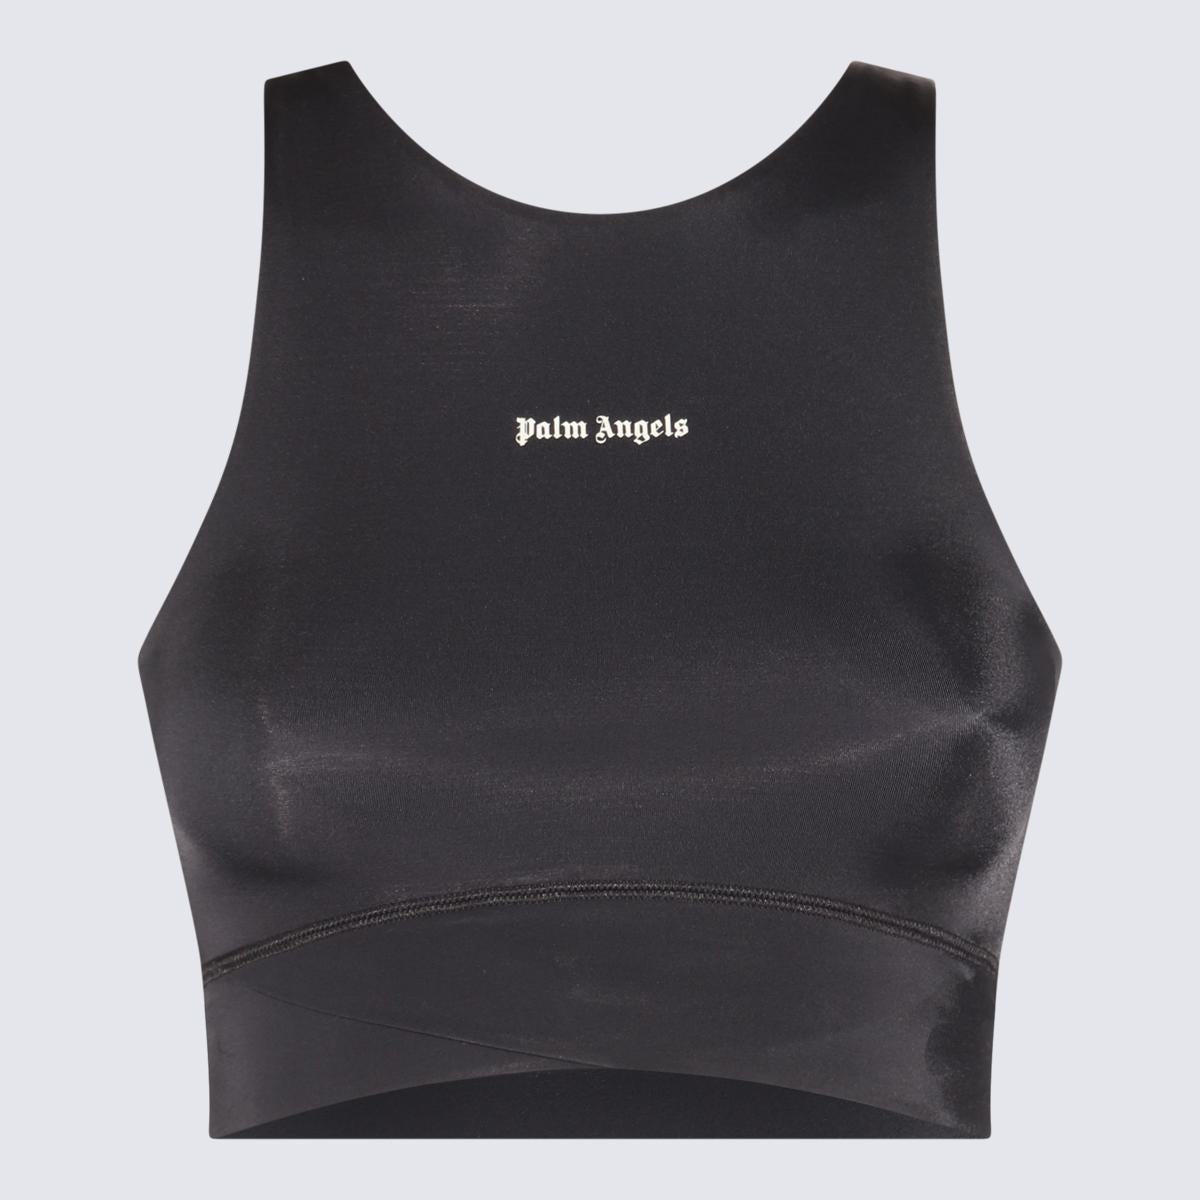 PALM ANGELS BLACK AND WHITE CROP TOP - 1